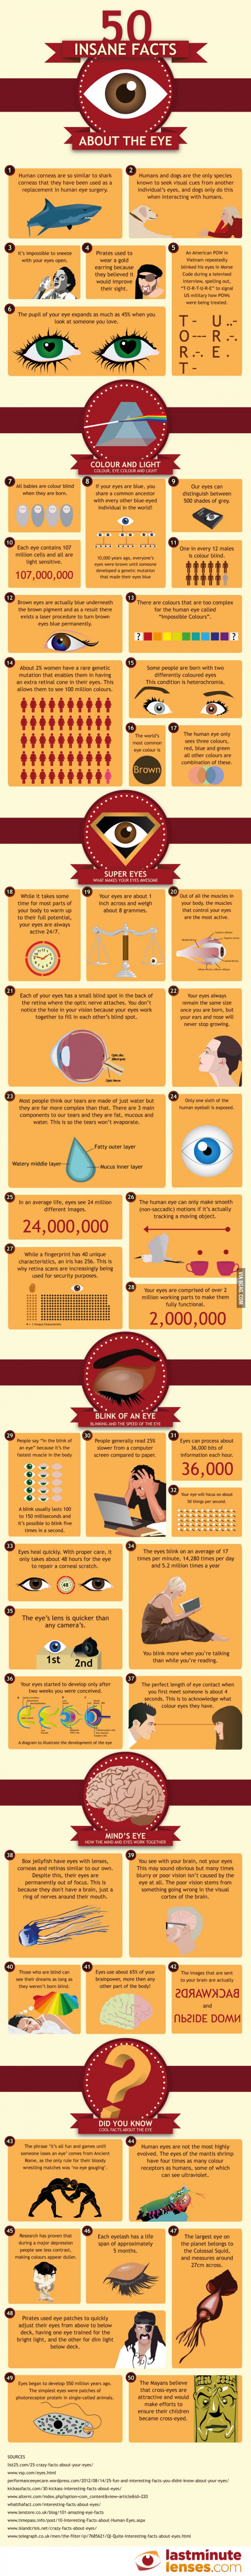 50 facts about the eye